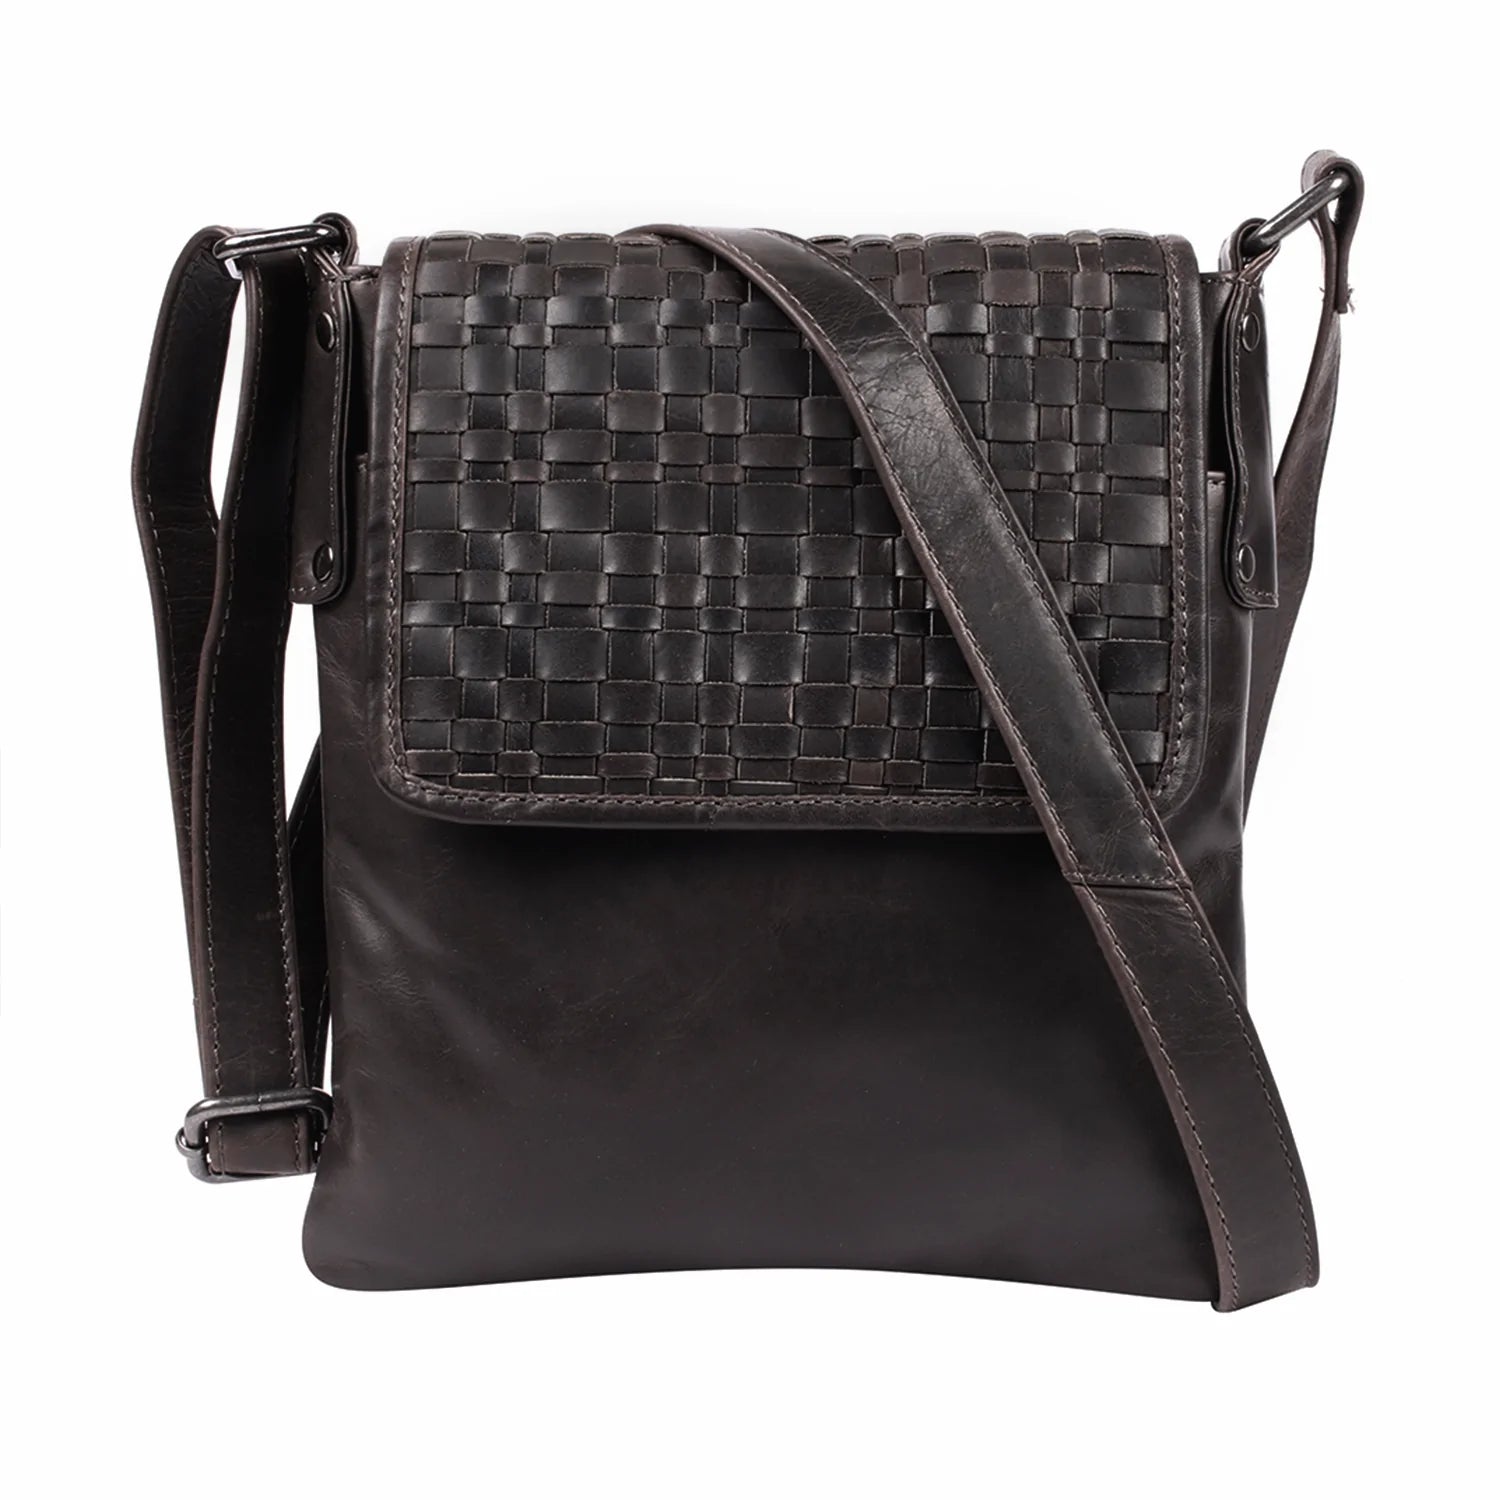 Leather Crossbody With Woven Front, Leather Handbags